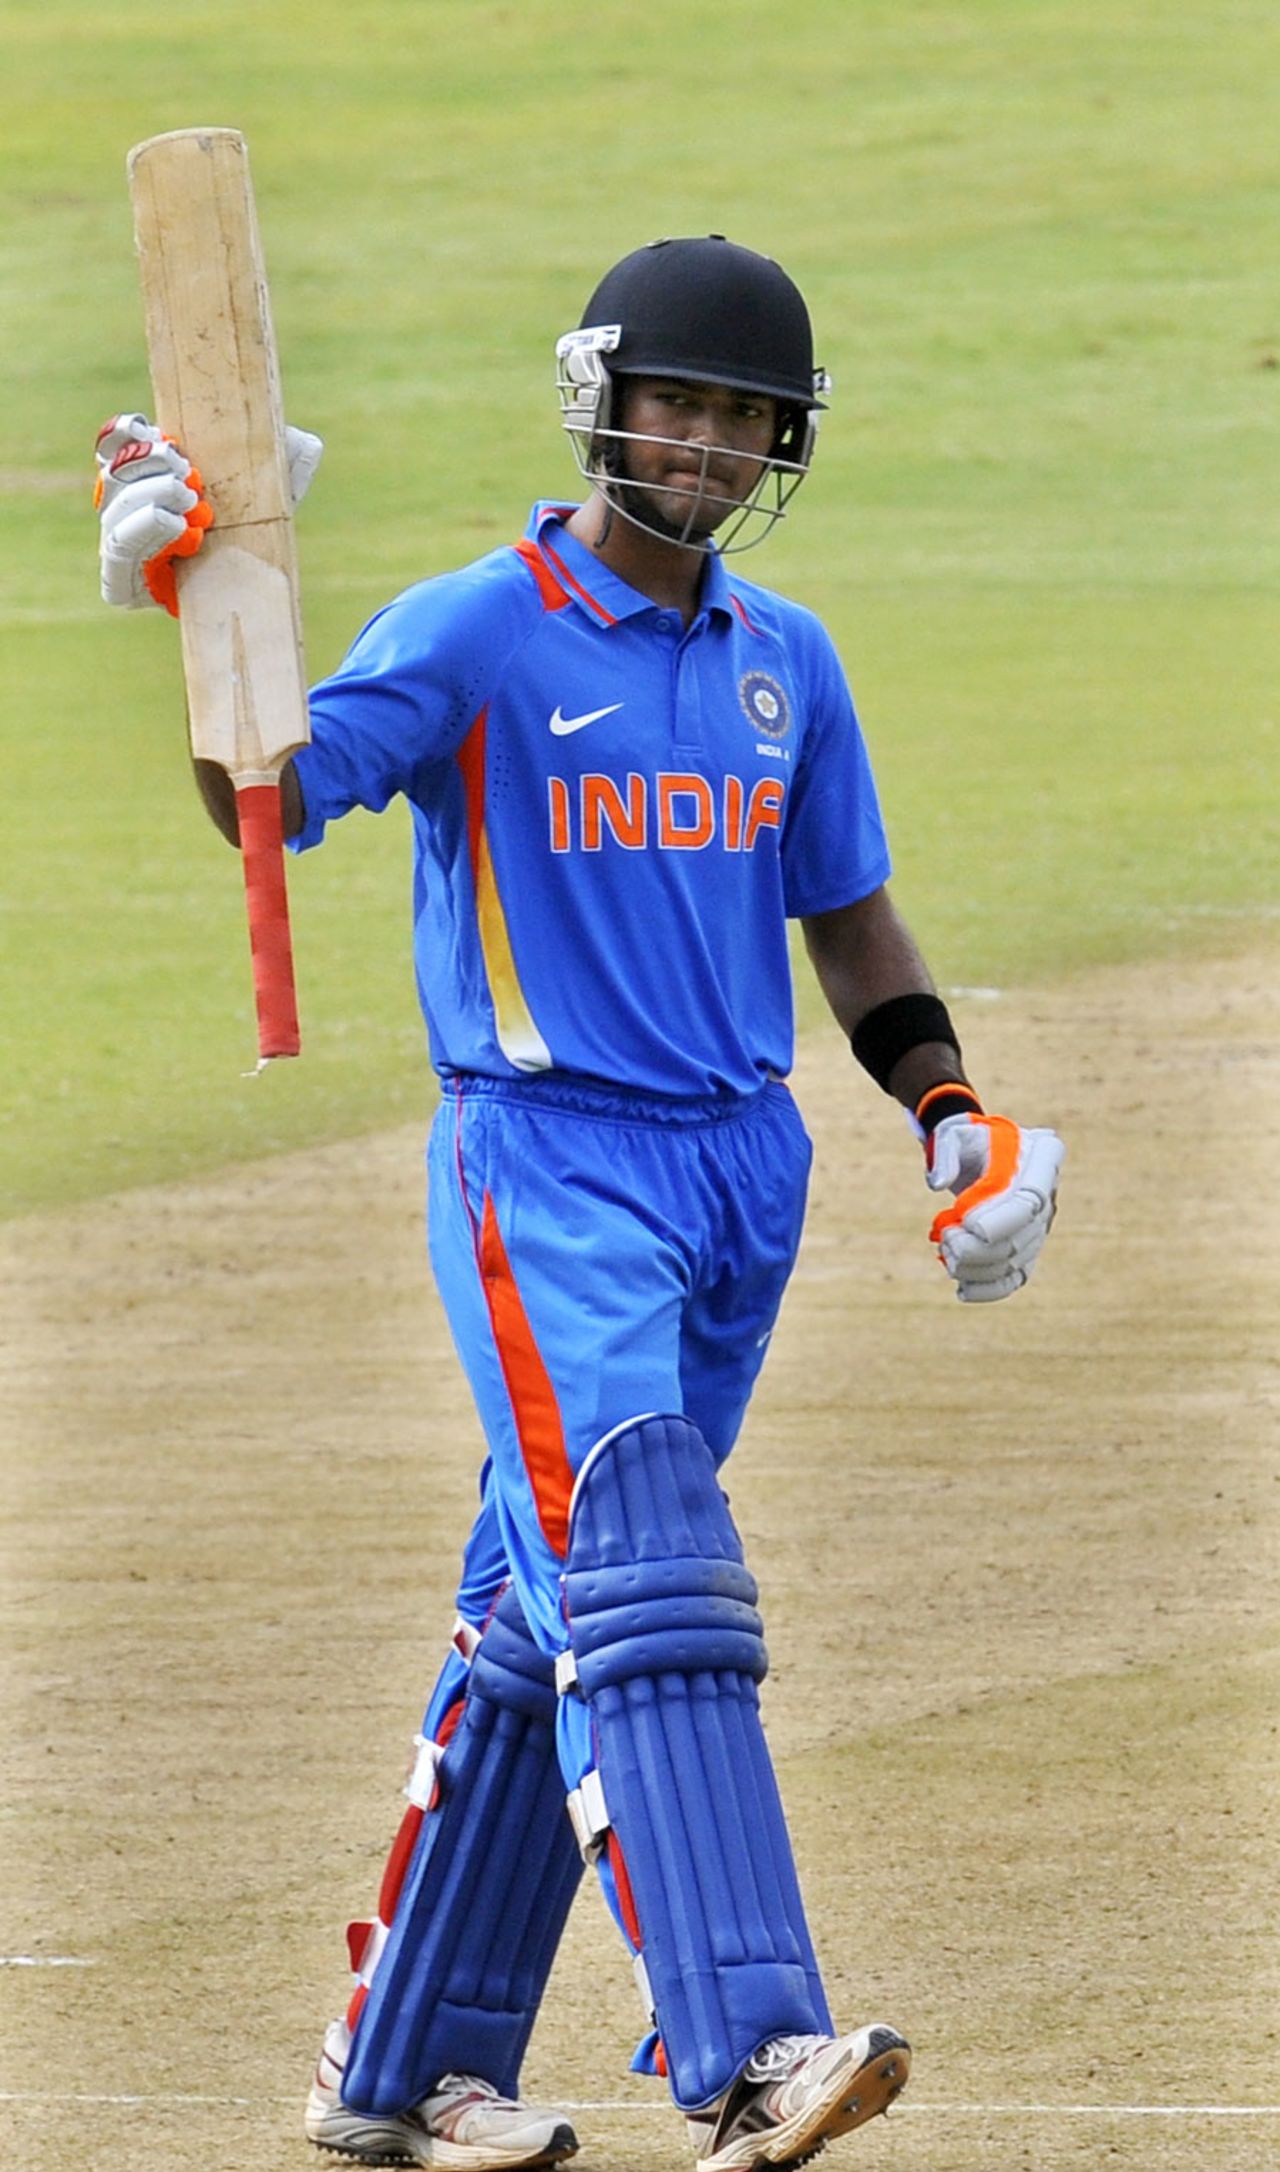 Unmukt Chand smashed a 88-ball 94 against New Zealand A, India A v New Zealand A, first unofficial ODI, Visakhapatnam, September 8, 2013